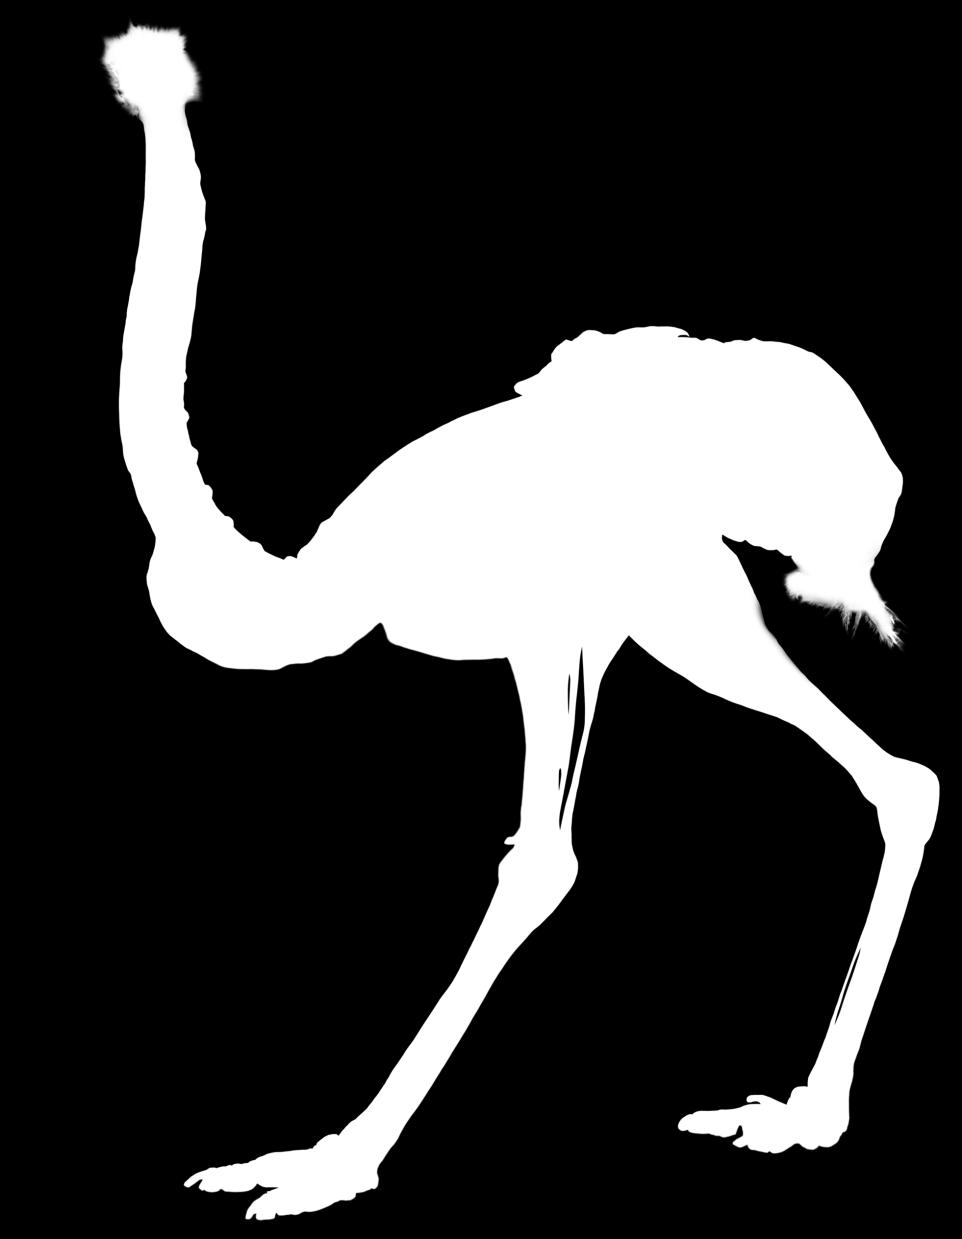 The wings of ostrich